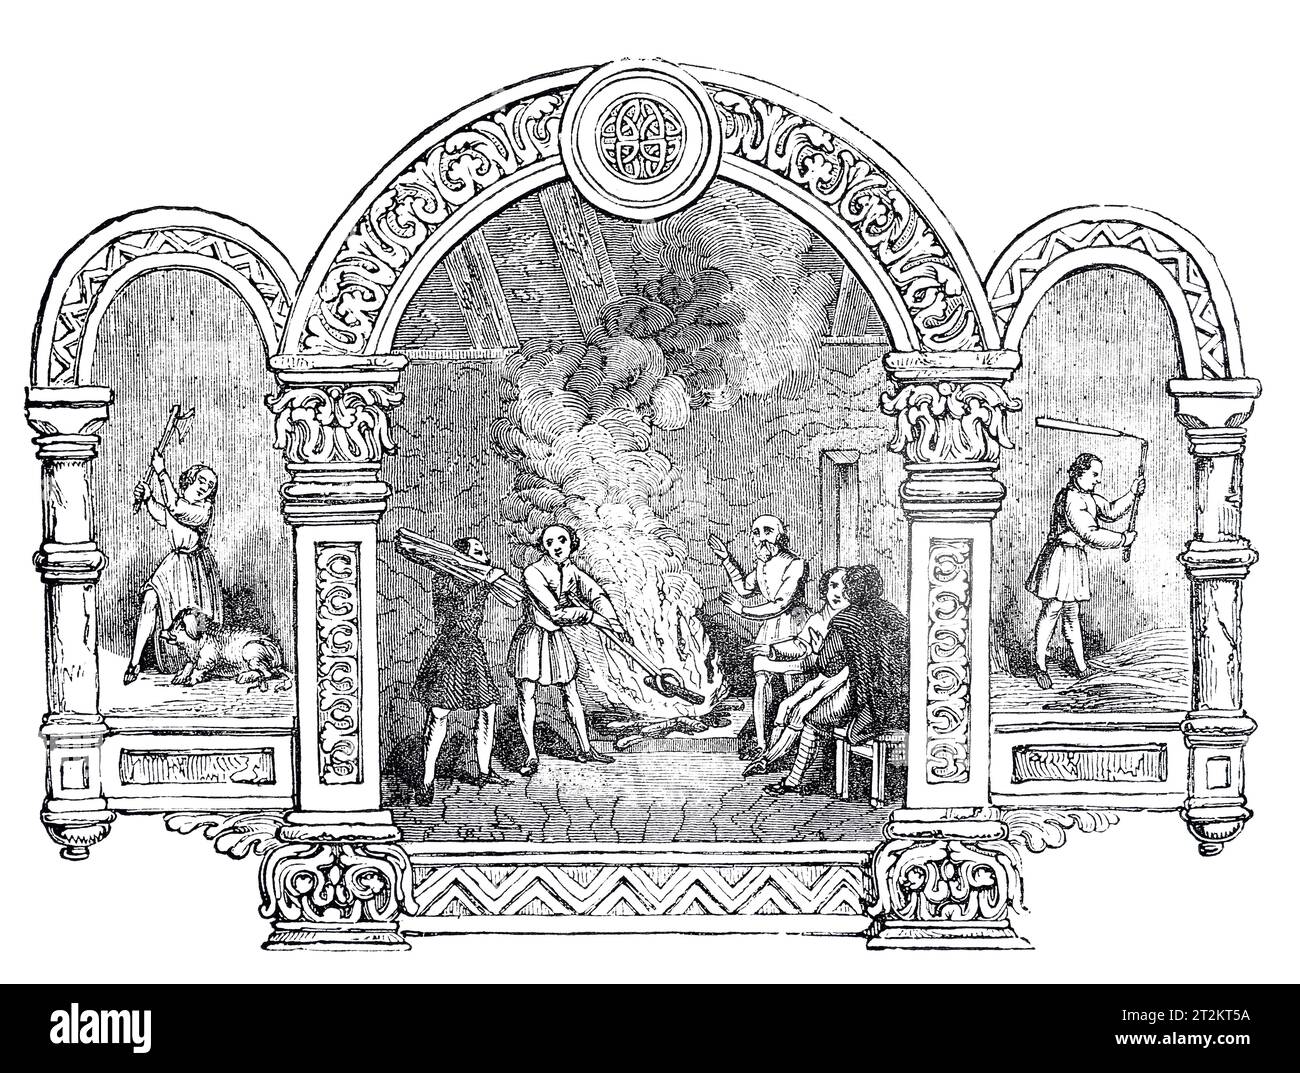 Saxon Emblems of the Month of November; Black and White Illustration from the 'Old England' published by James Sangster in 1860. Stock Photo